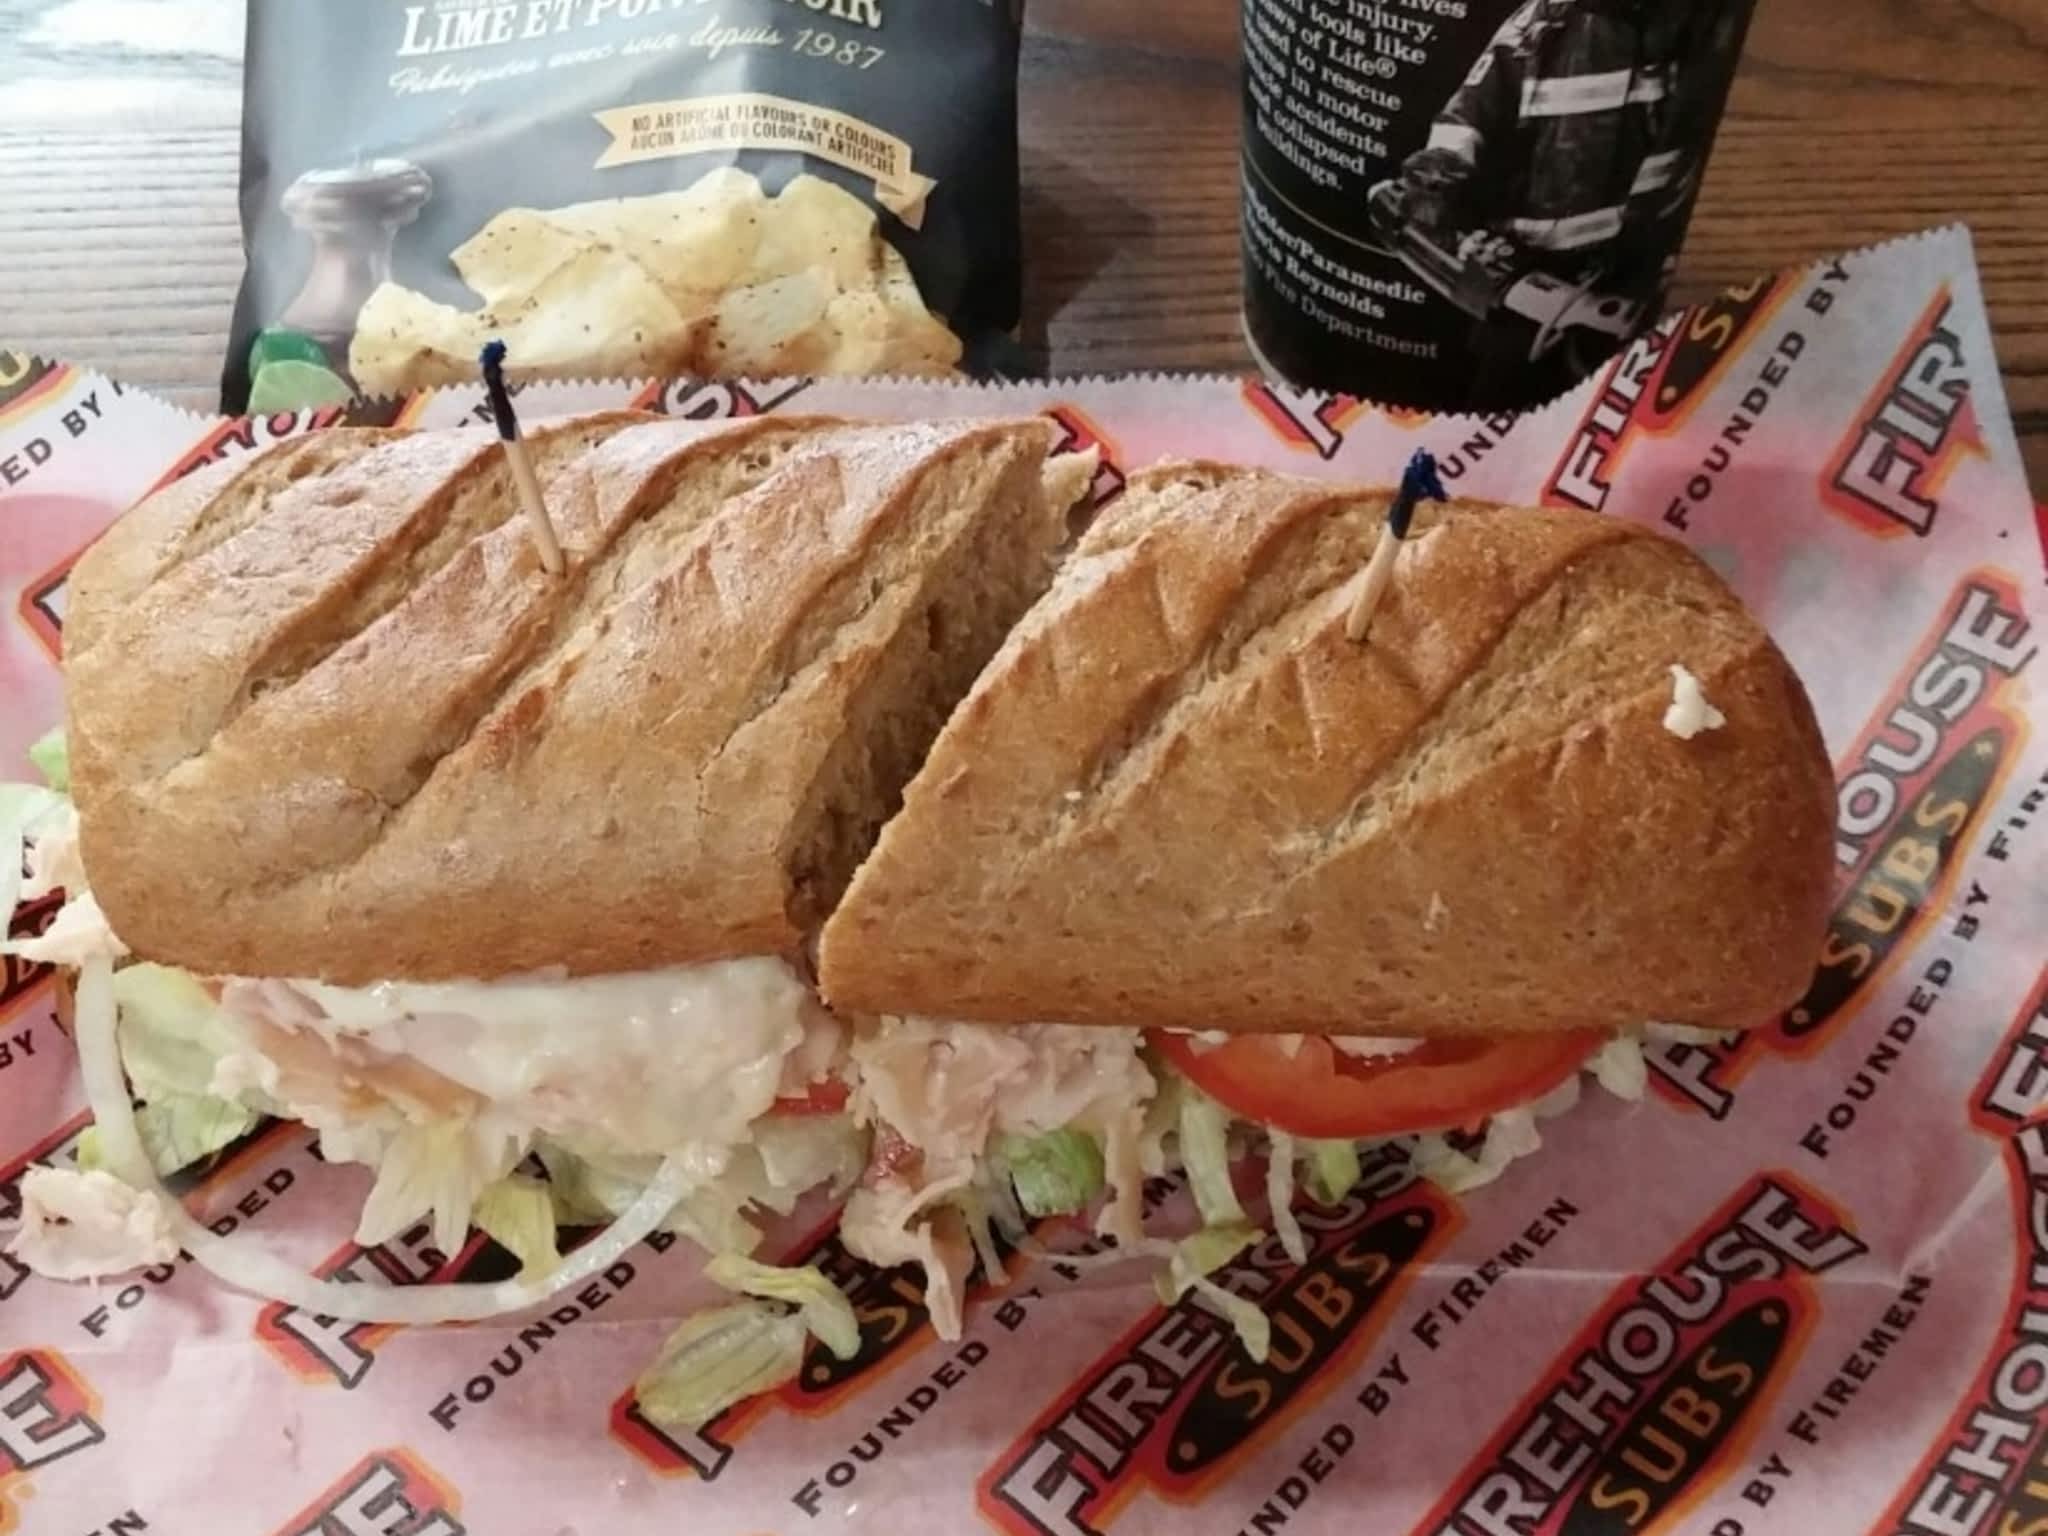 photo Firehouse Subs